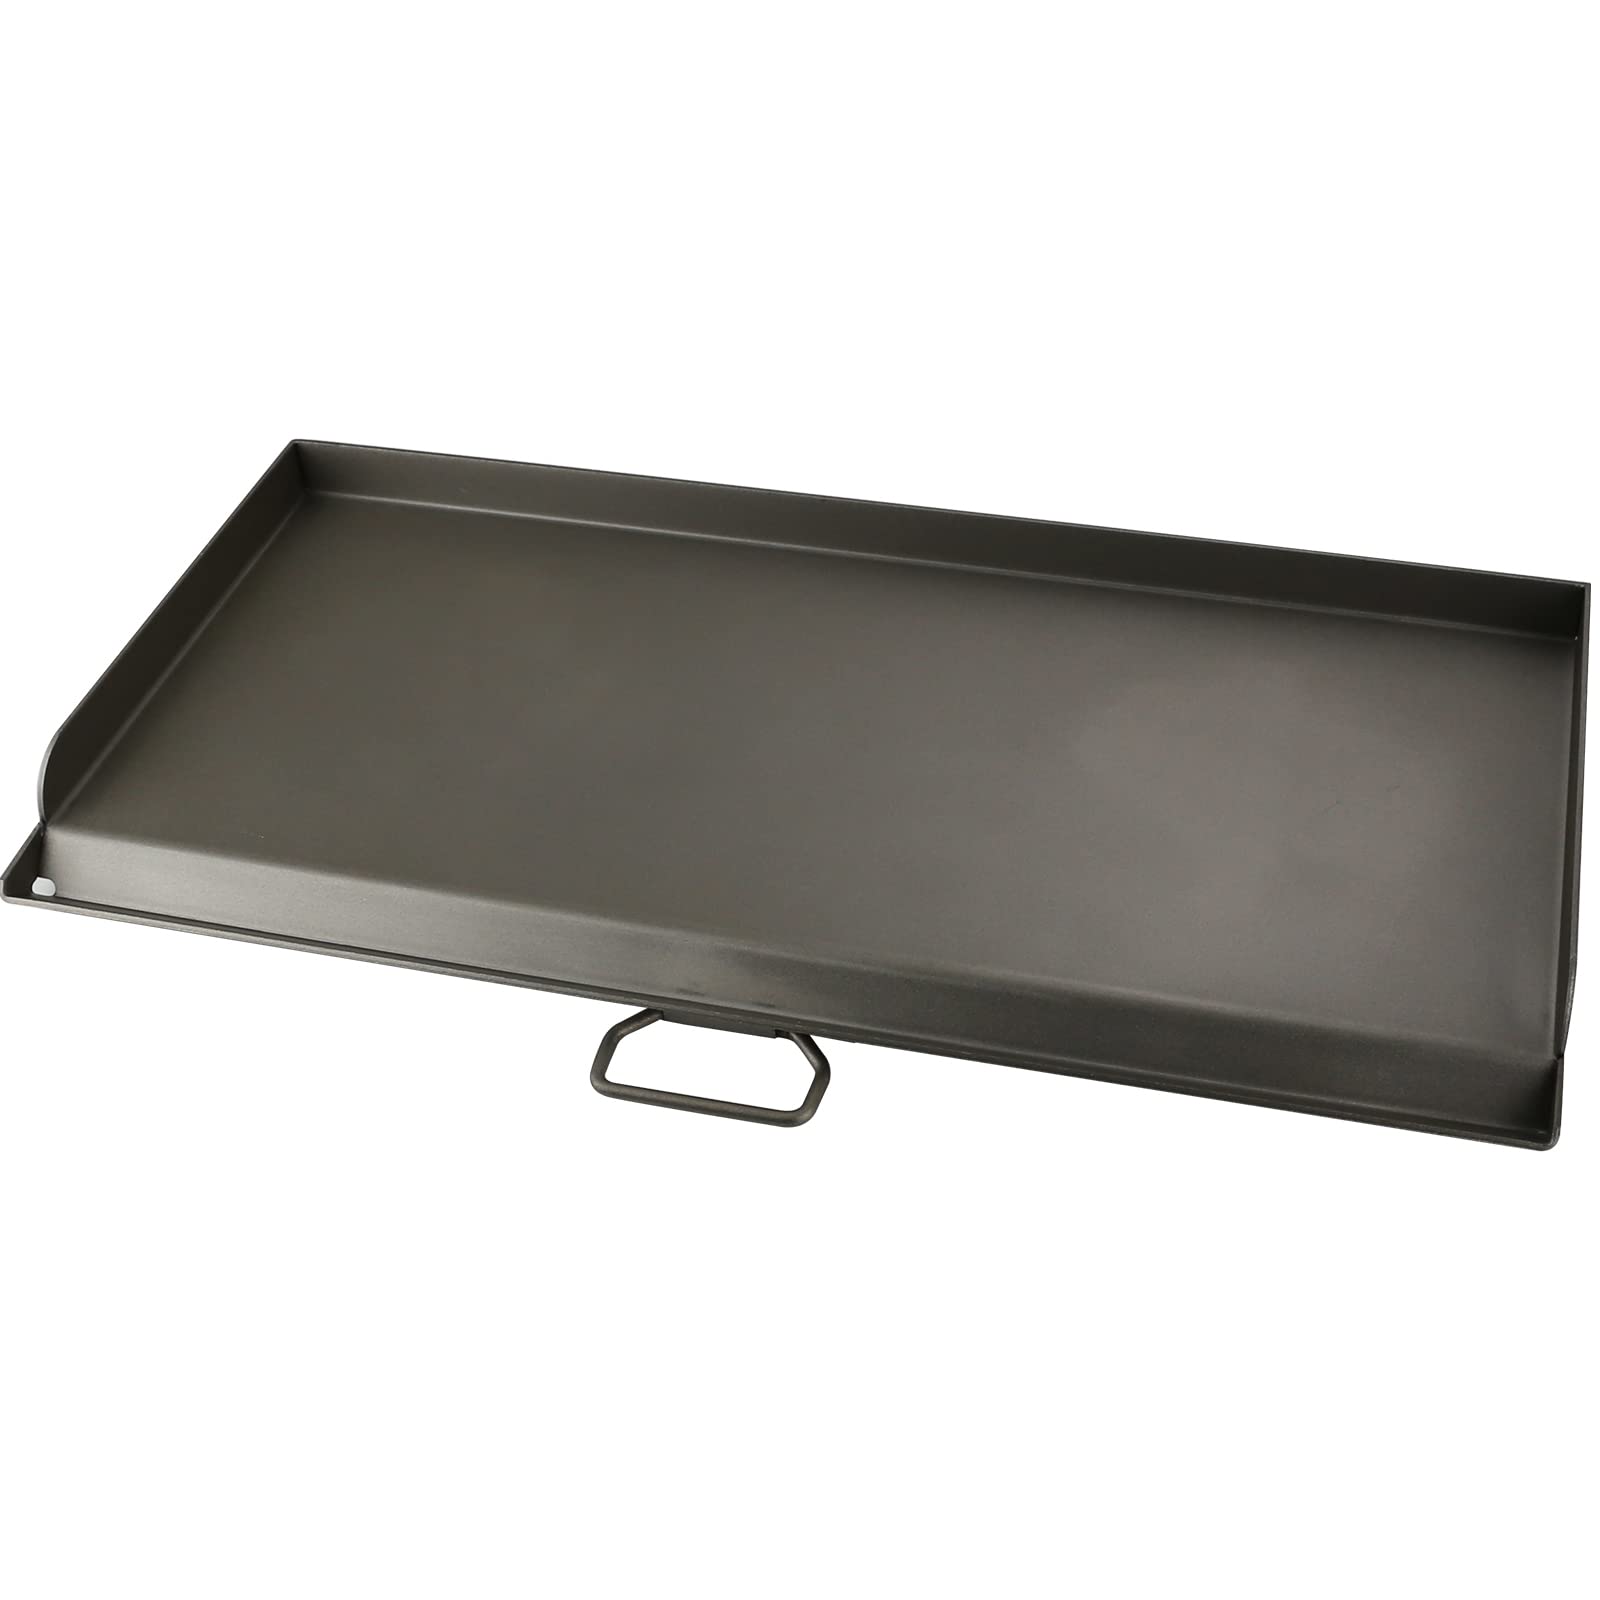 A12 Uniflasy Fry Griddle Top For Camp Chef 2 Burner Stove, 14X32